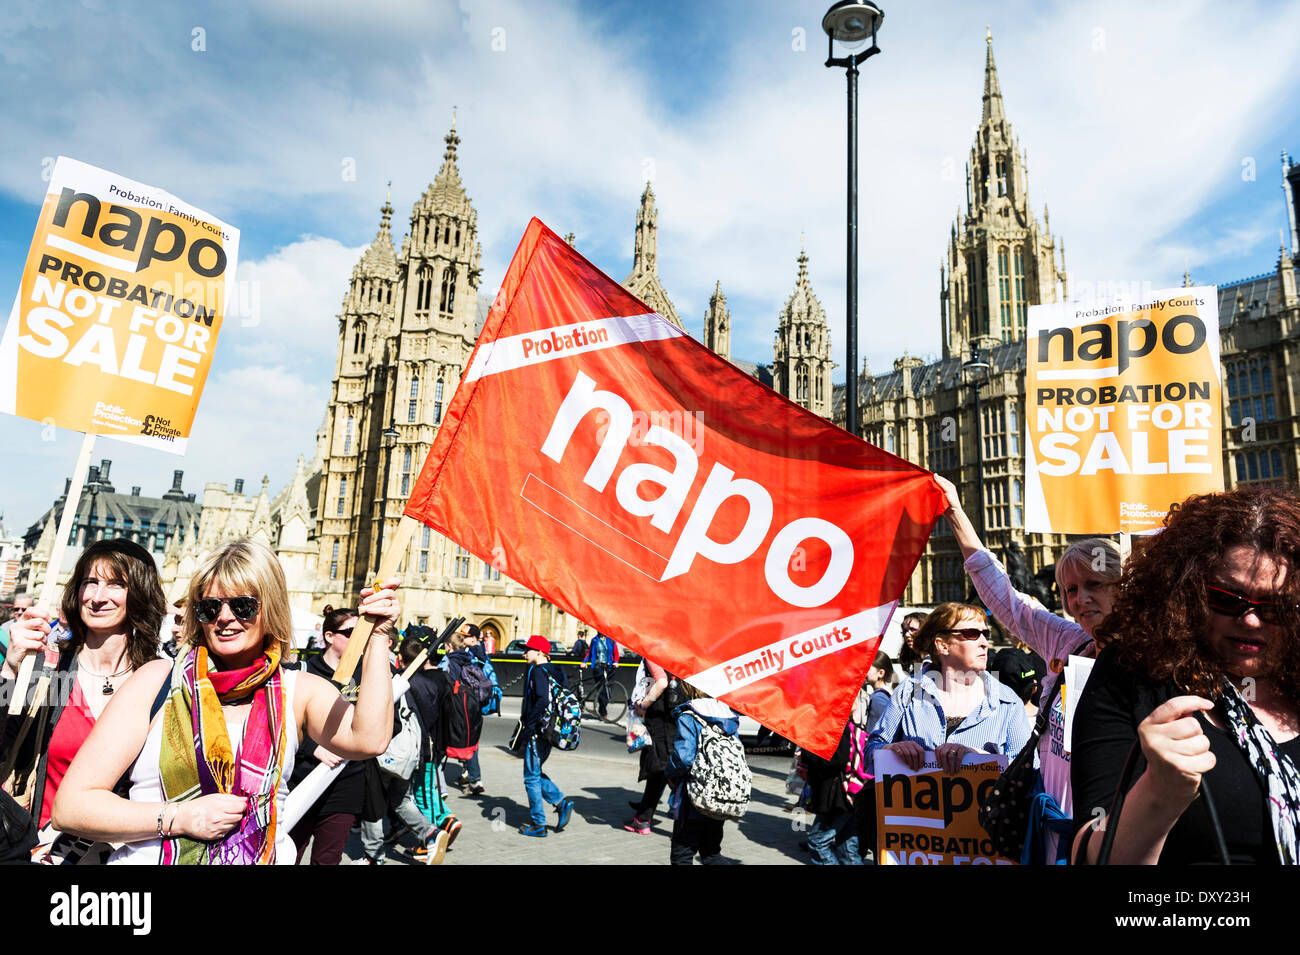 London, UK. 1st April 2014.  A NAPO banner is held aloft outside the Houses of Parliament as part of the joint demonstration by probation officers and legal aid solicitors. Photographer: Gordon Scammell/Alamy Live News Stock Photo